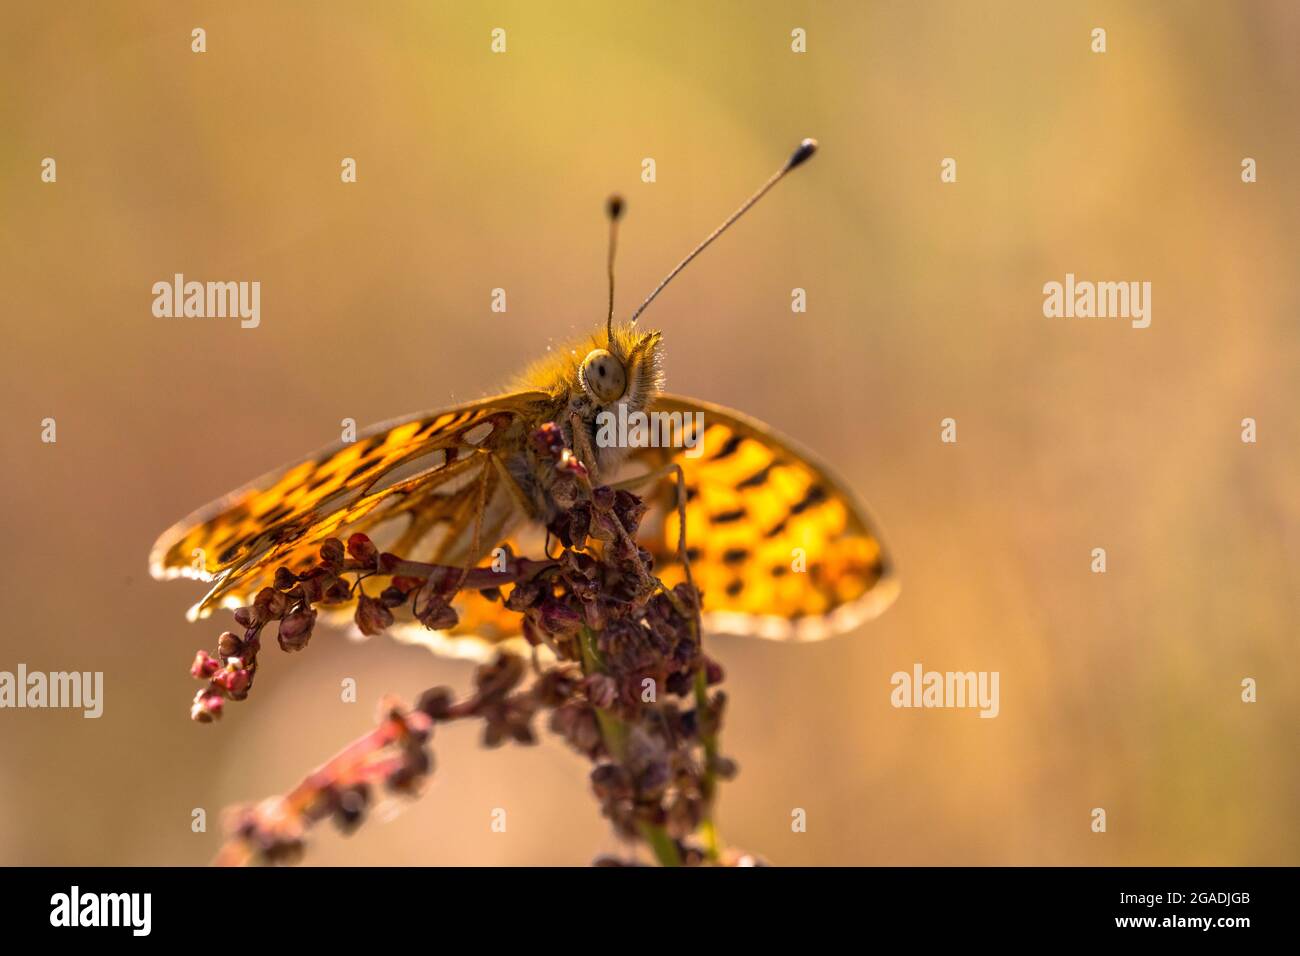 Queen of Spain fritillary (Issoria lathonia) resting on flower of sorrel with backlight sun Stock Photo